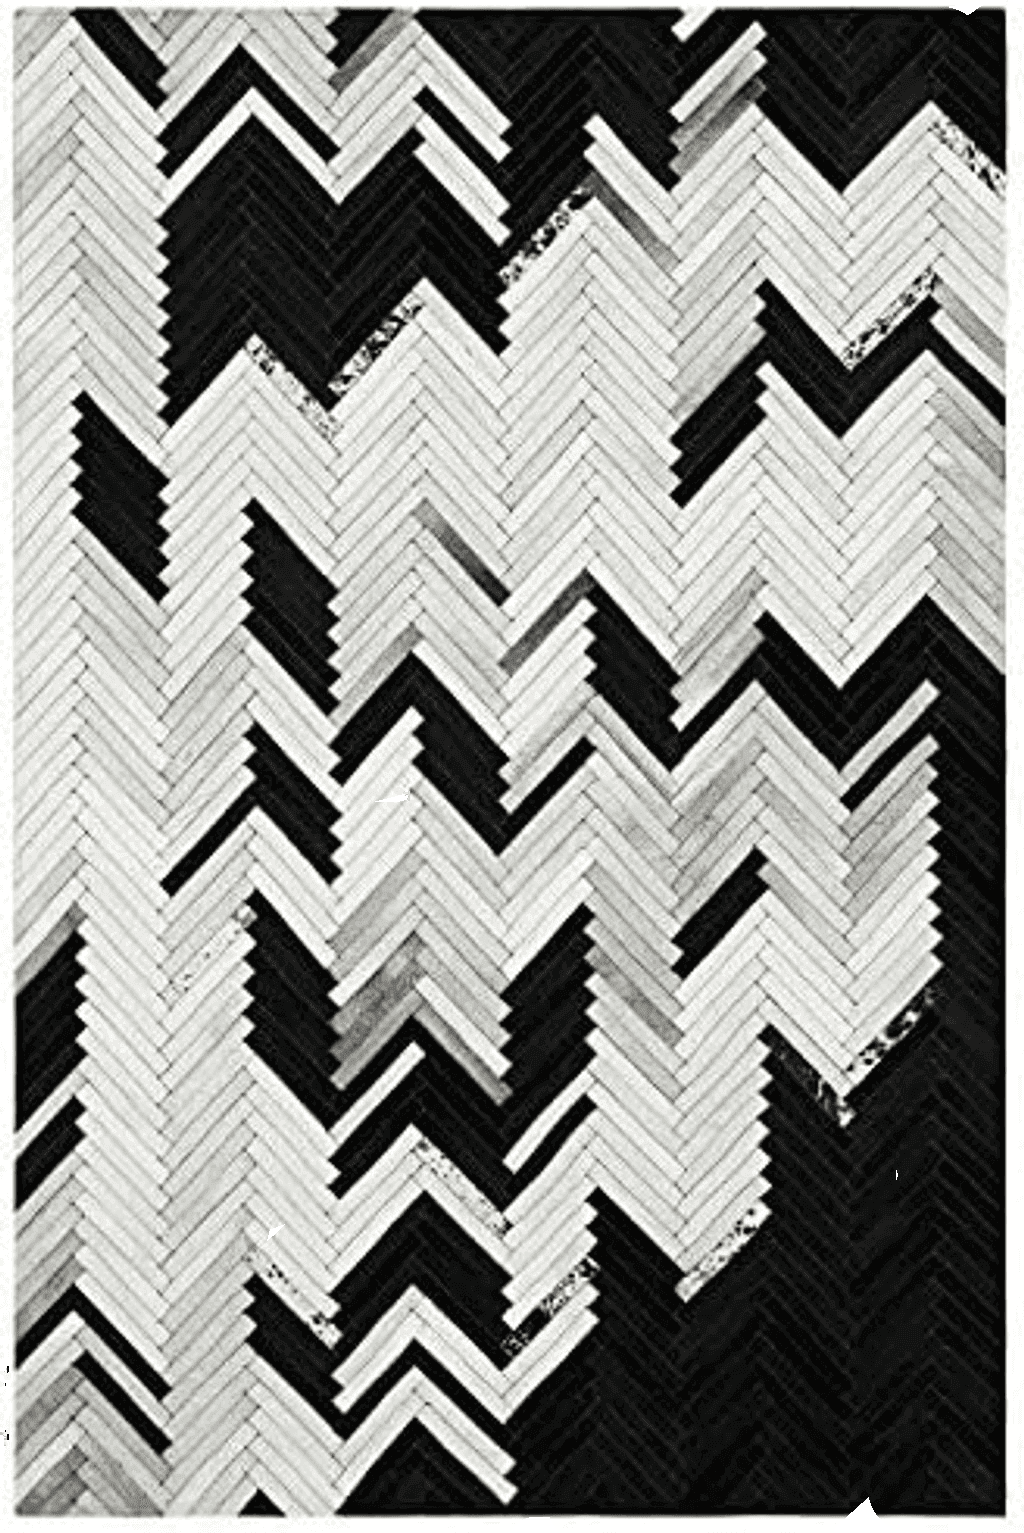 Handmade Black and White Cowhide Patchwork Rug - Black and White with Grayish Stripes Herringbone Chevron Patchwork Cowhide Rug 5 ft X 8 ft